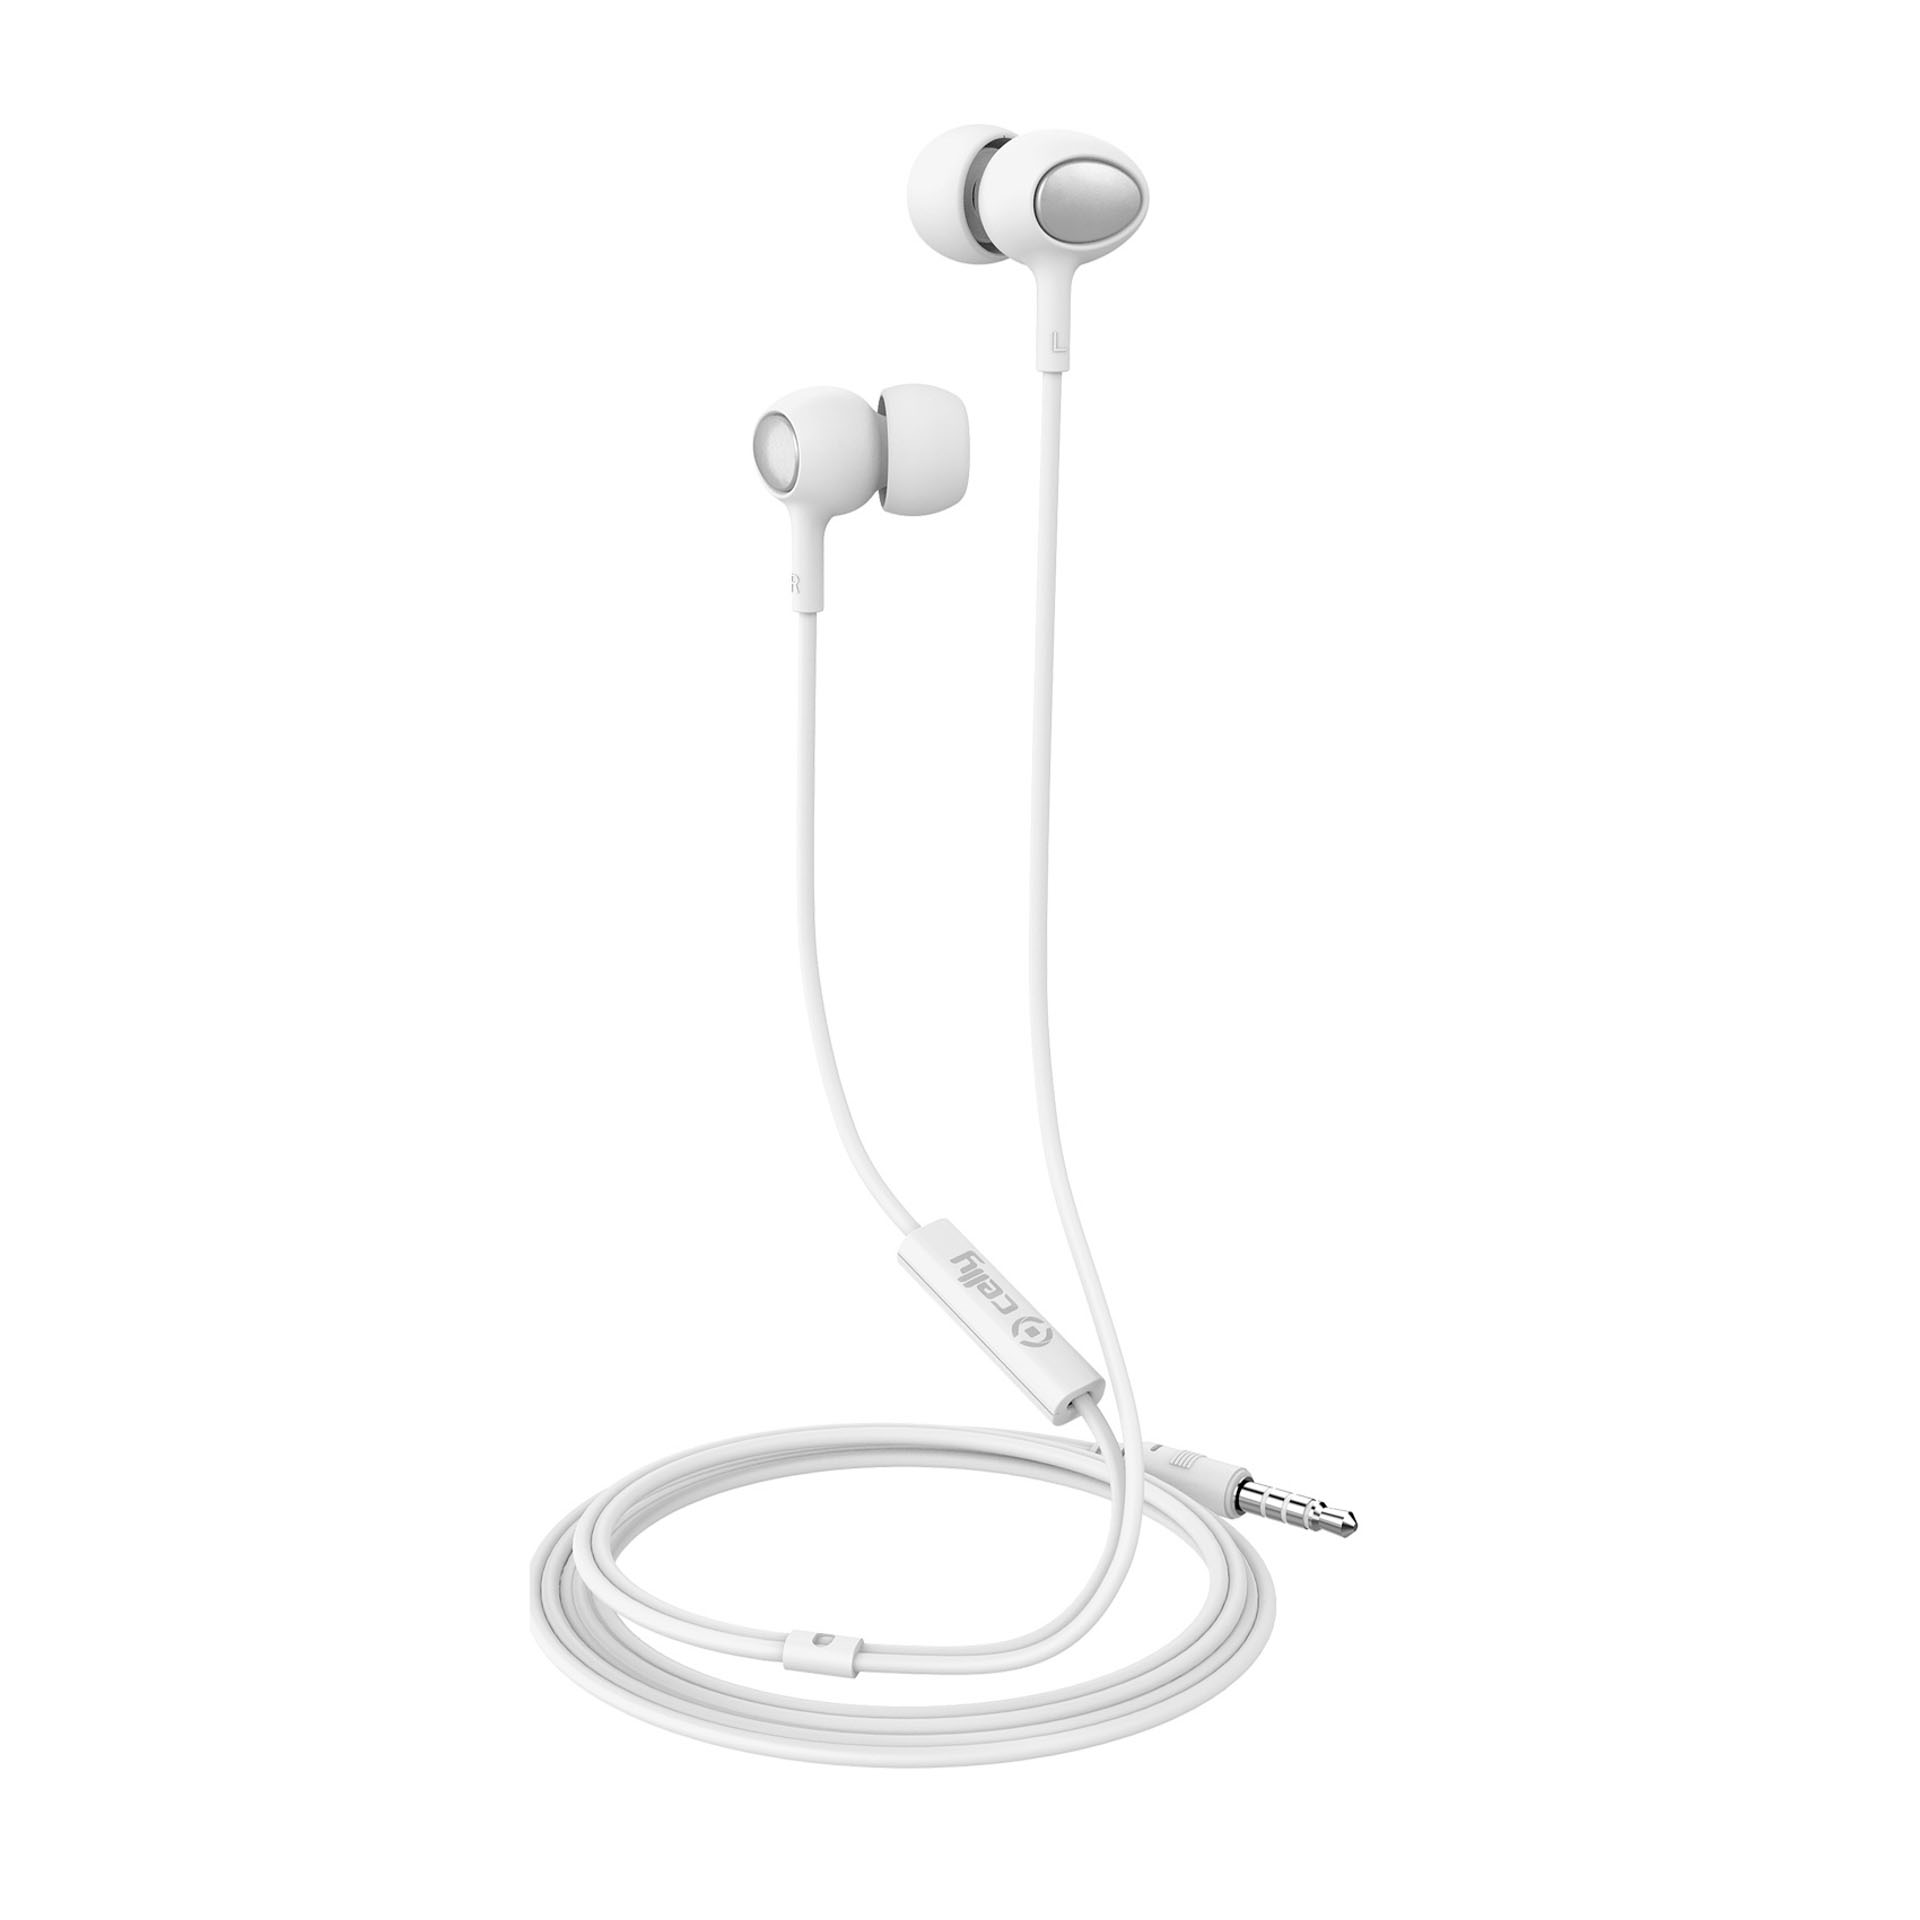 Auricolari stereo Celly Up500 - bianco, , large